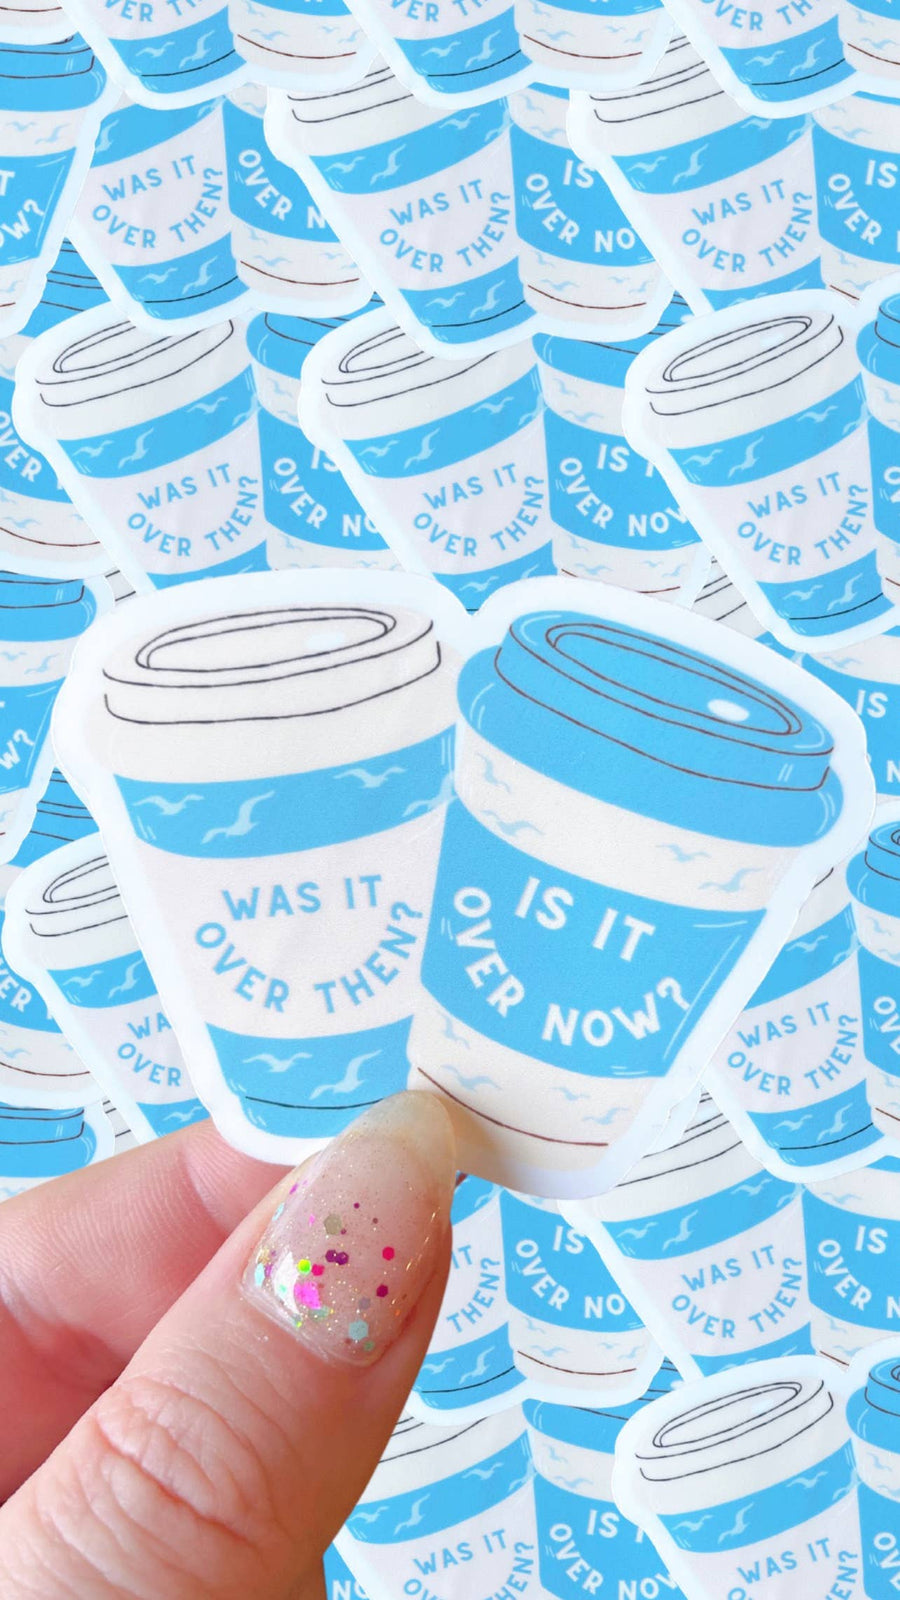 Taylor swift inspired waterproof sticker|over now coffee